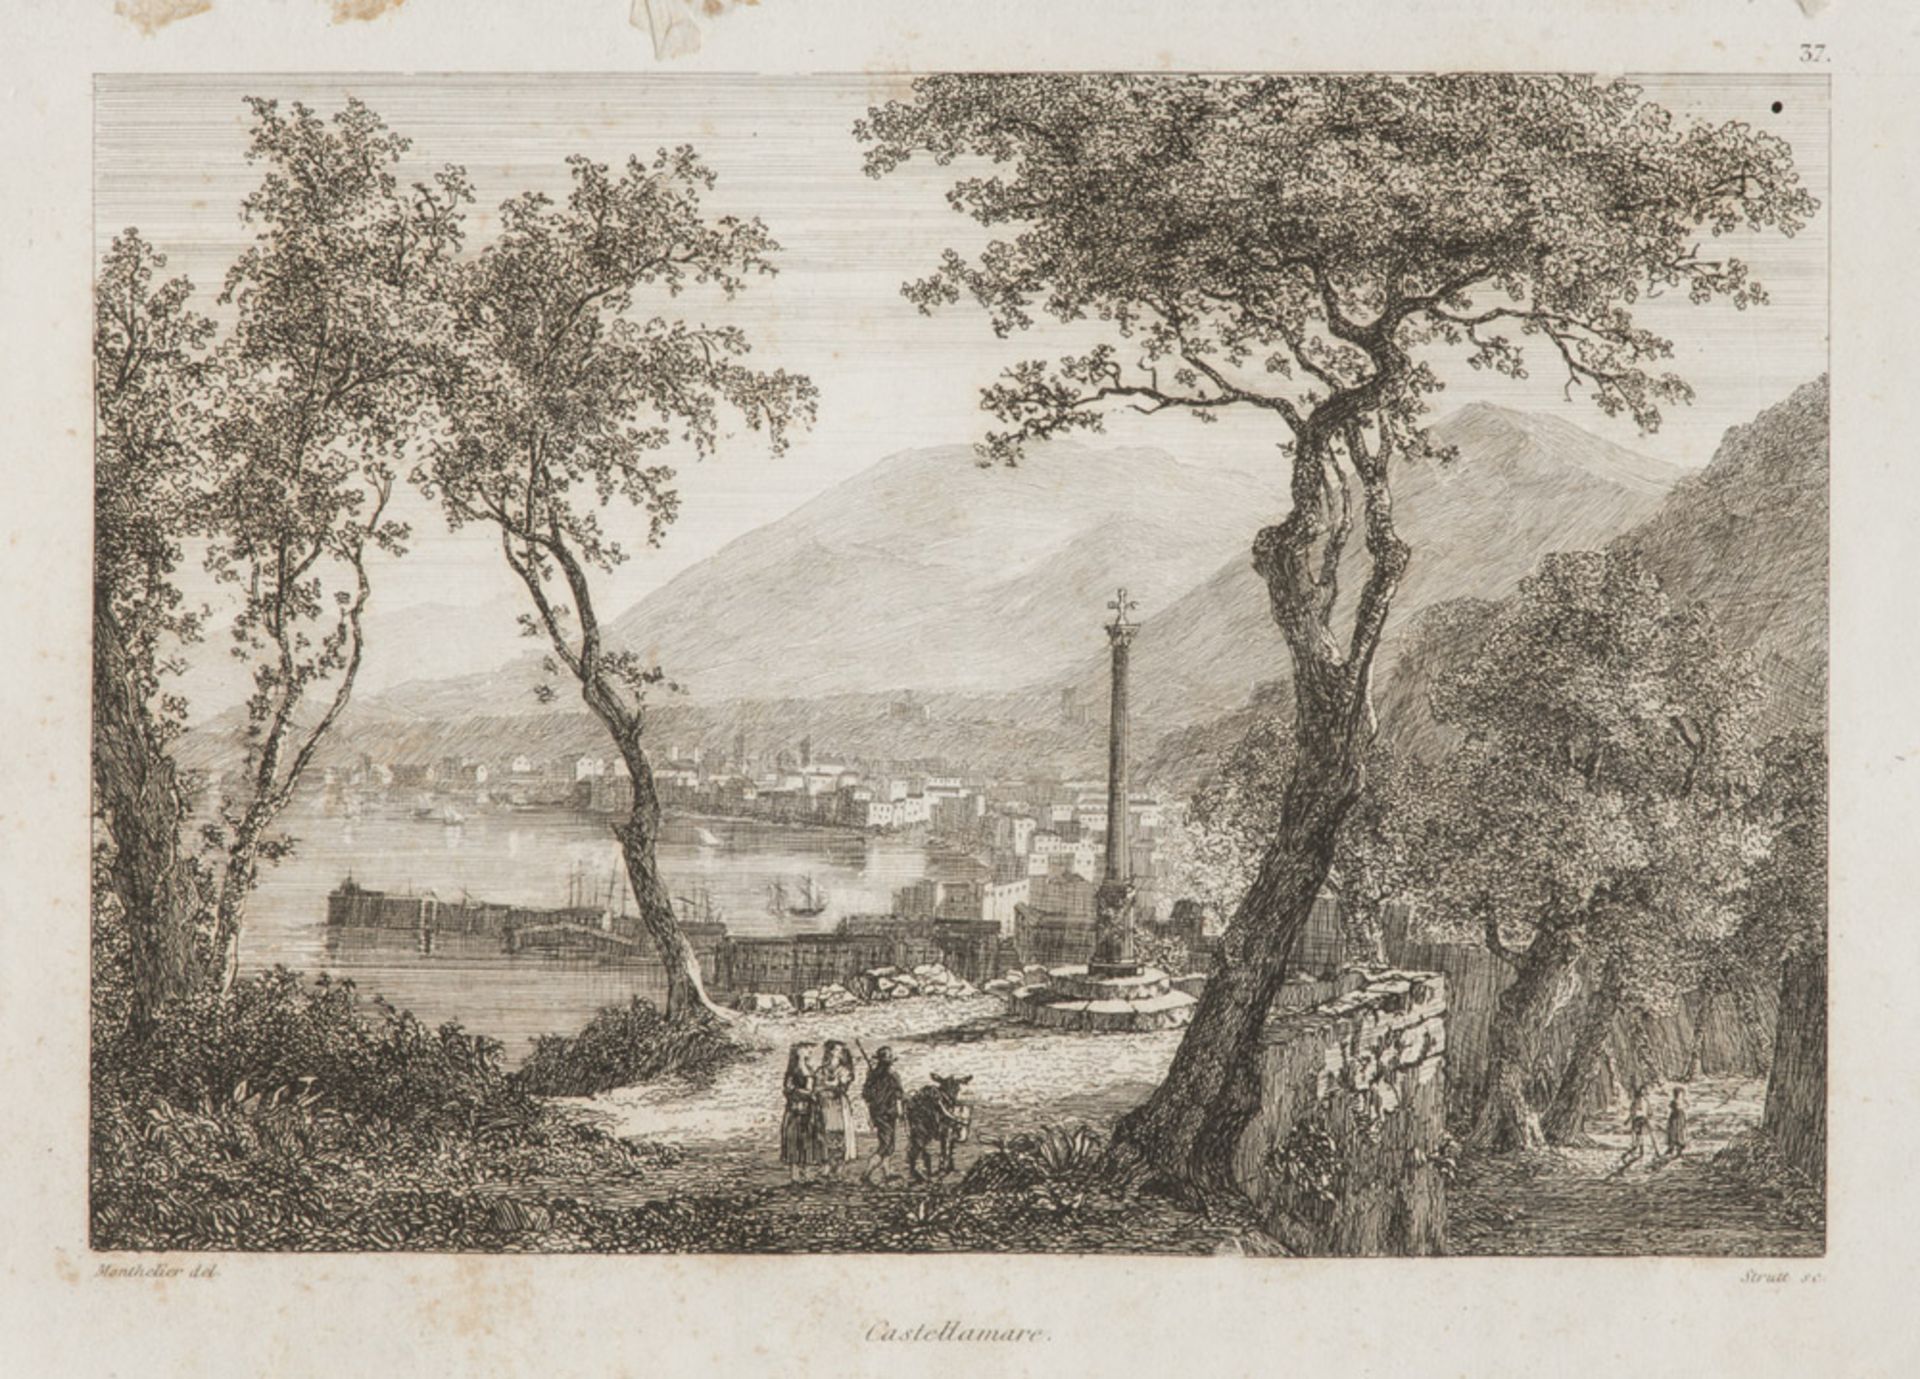 ENGRAVINGSES Album of 37 incisions with views in Naples and scenes popular nineteenth-century.